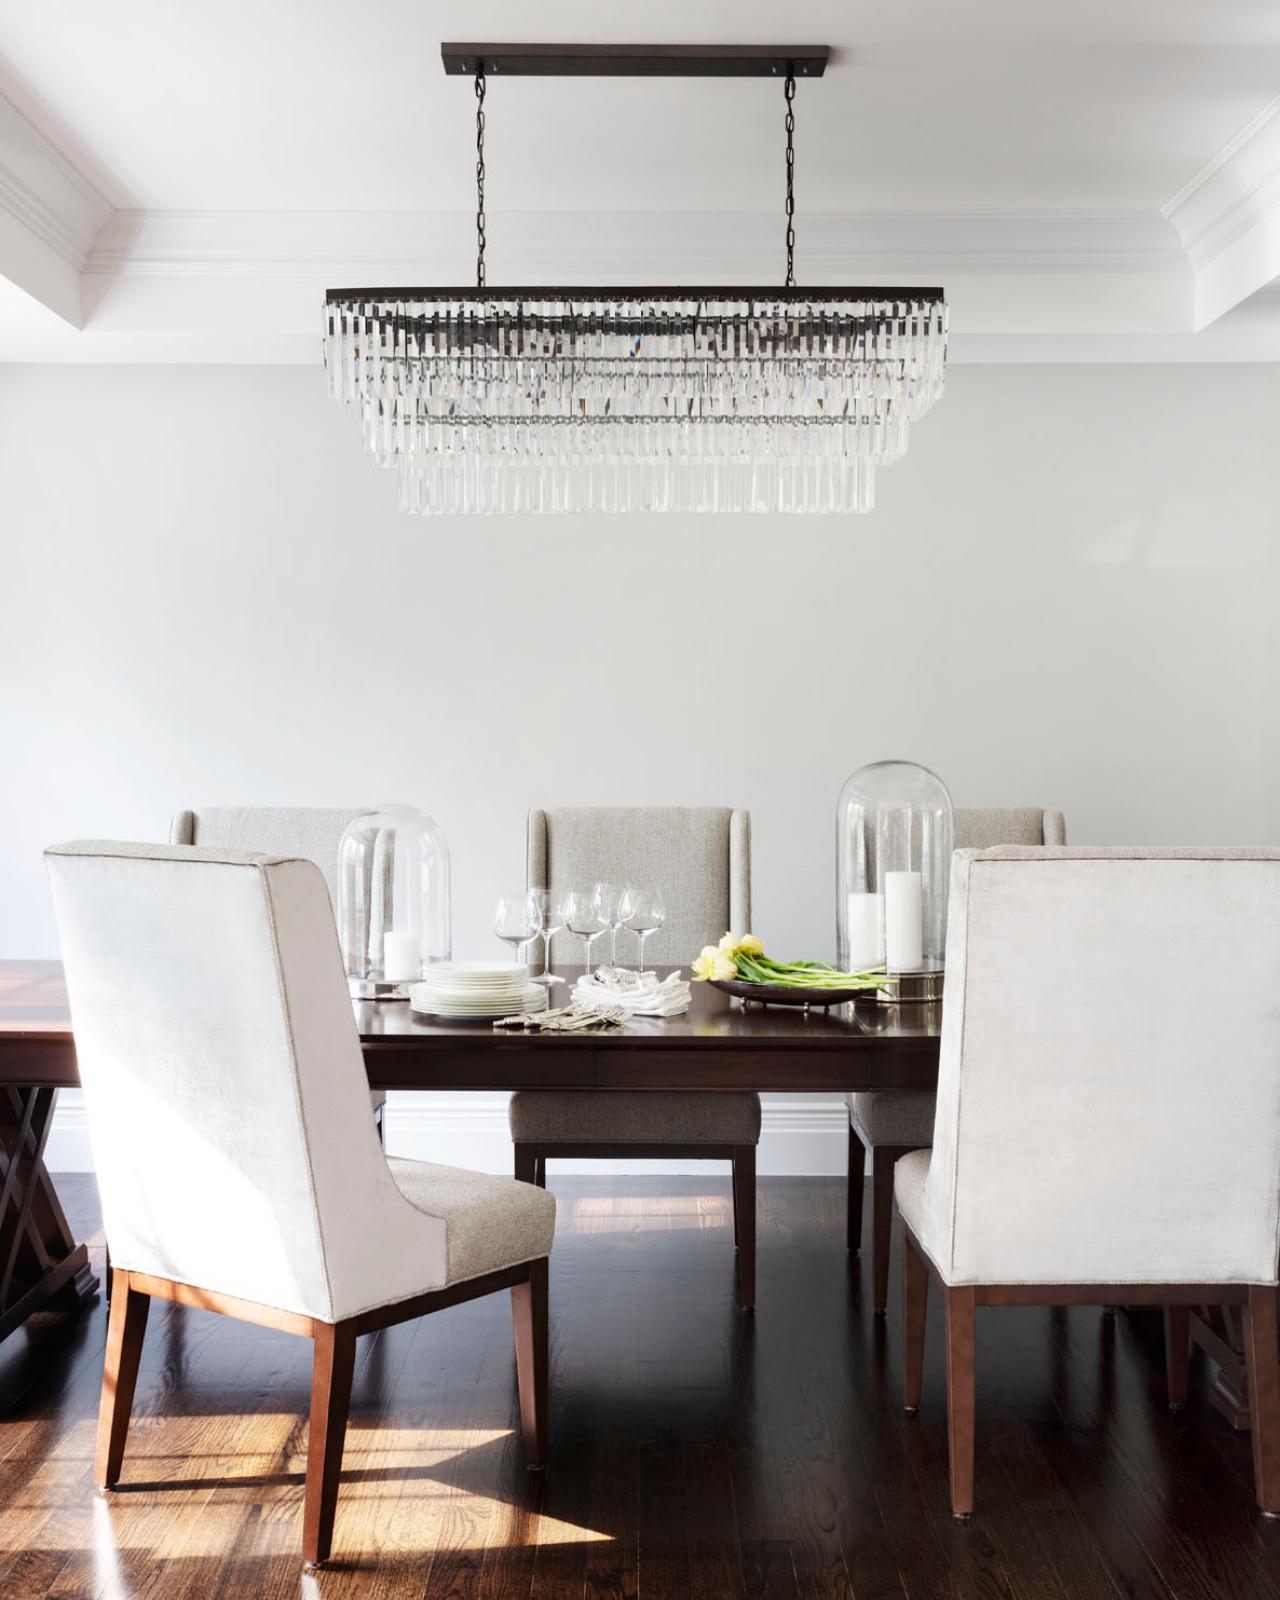 How To Choose Dining Room Lighting, Pictures Of Light Fixtures Over Dining Room Tables